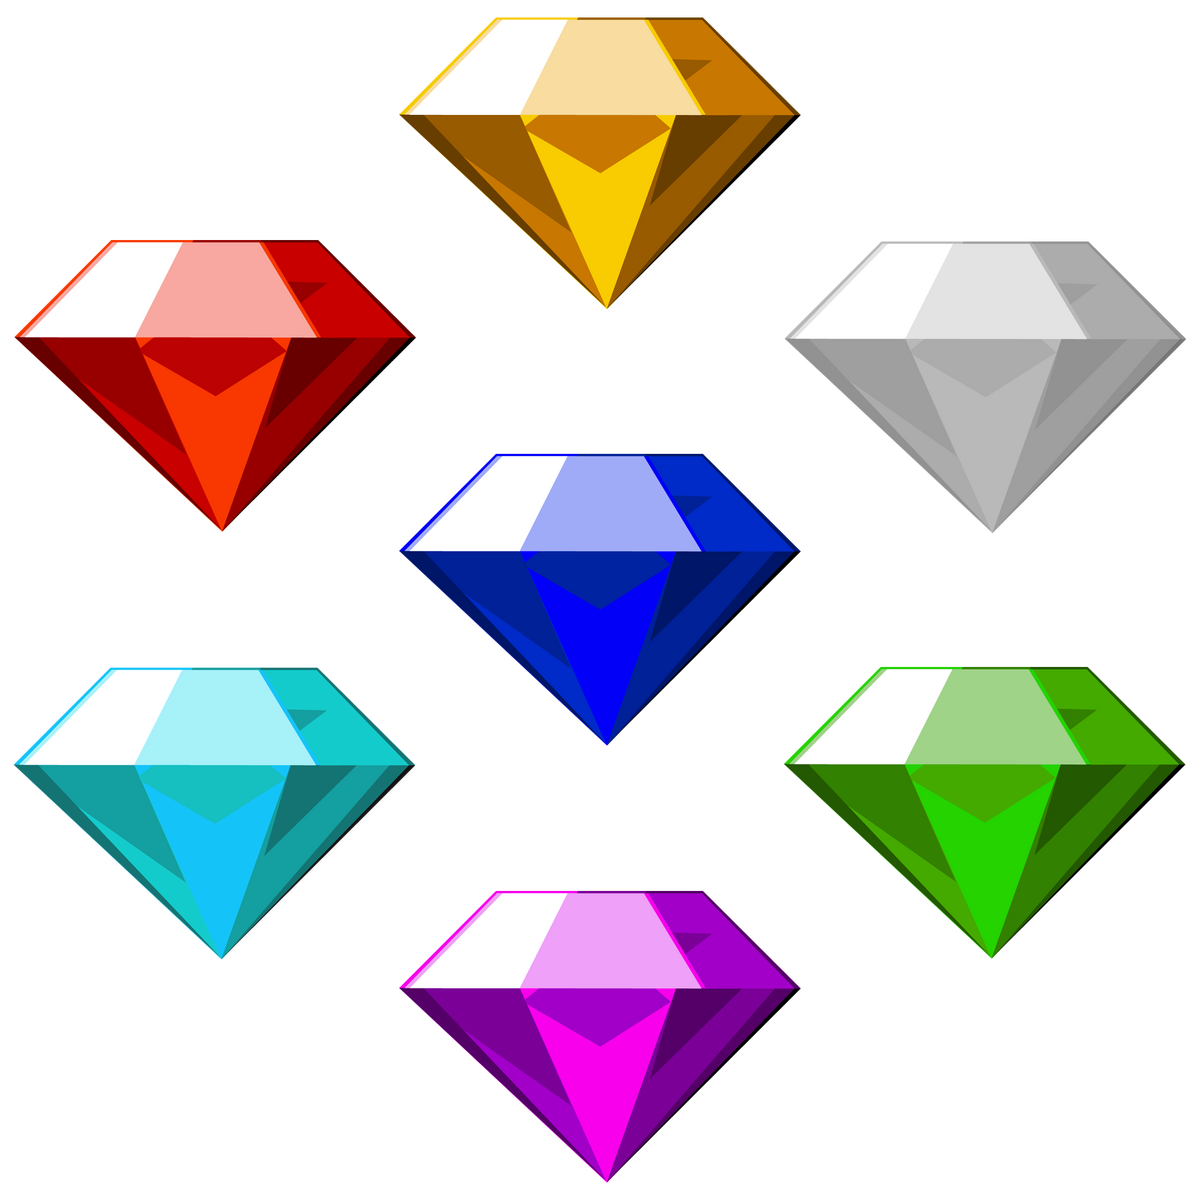 Colored diamonds Wiki: The great mystery of natural colored diamonds  simplified